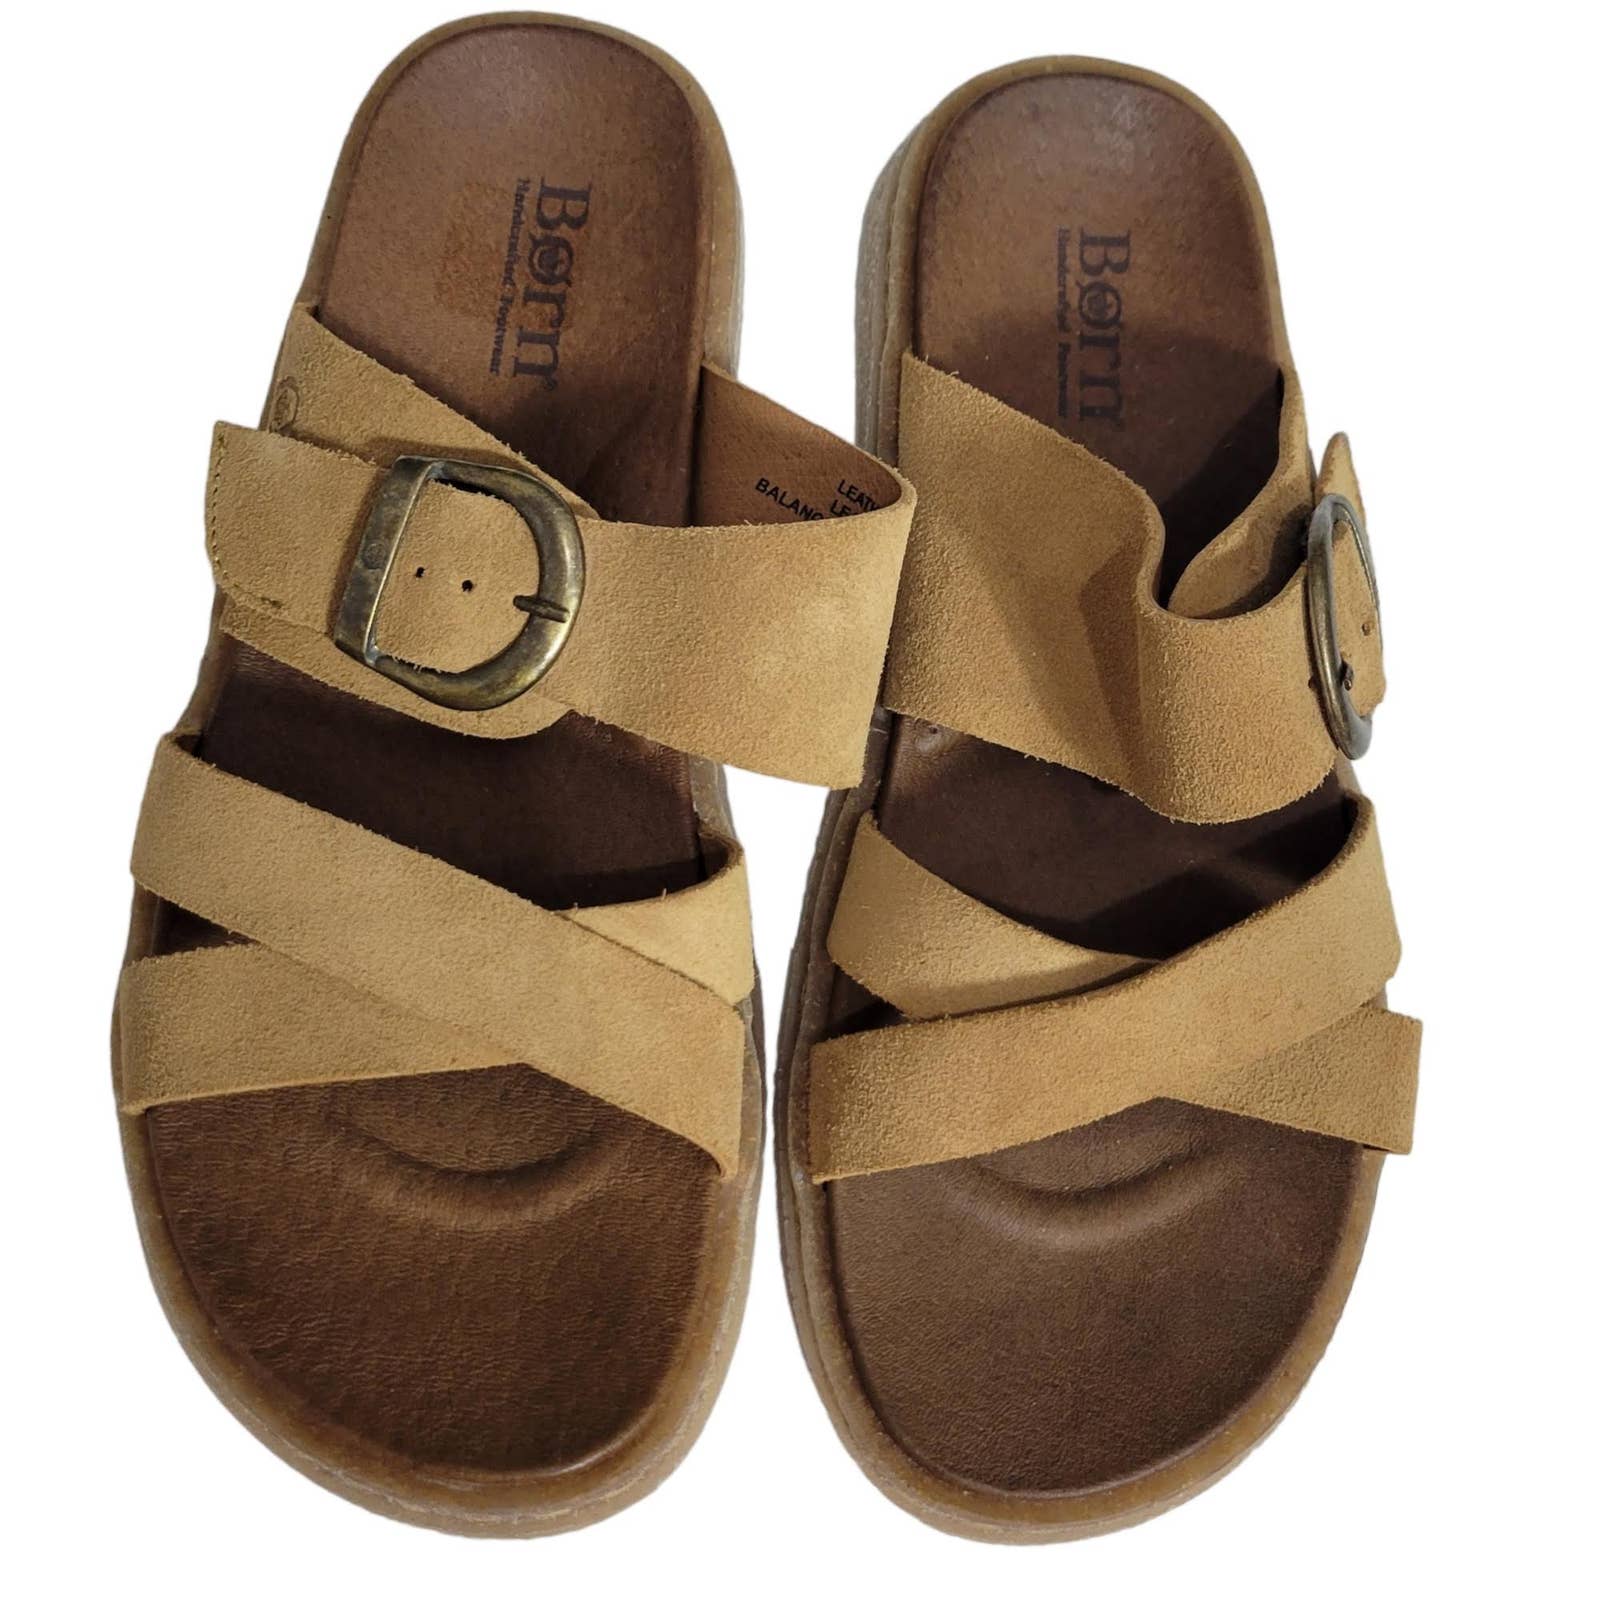 Born Caite Sandals Yellow Tan Leather Flats Wide Buckle Straps Slides Slip On Size 8